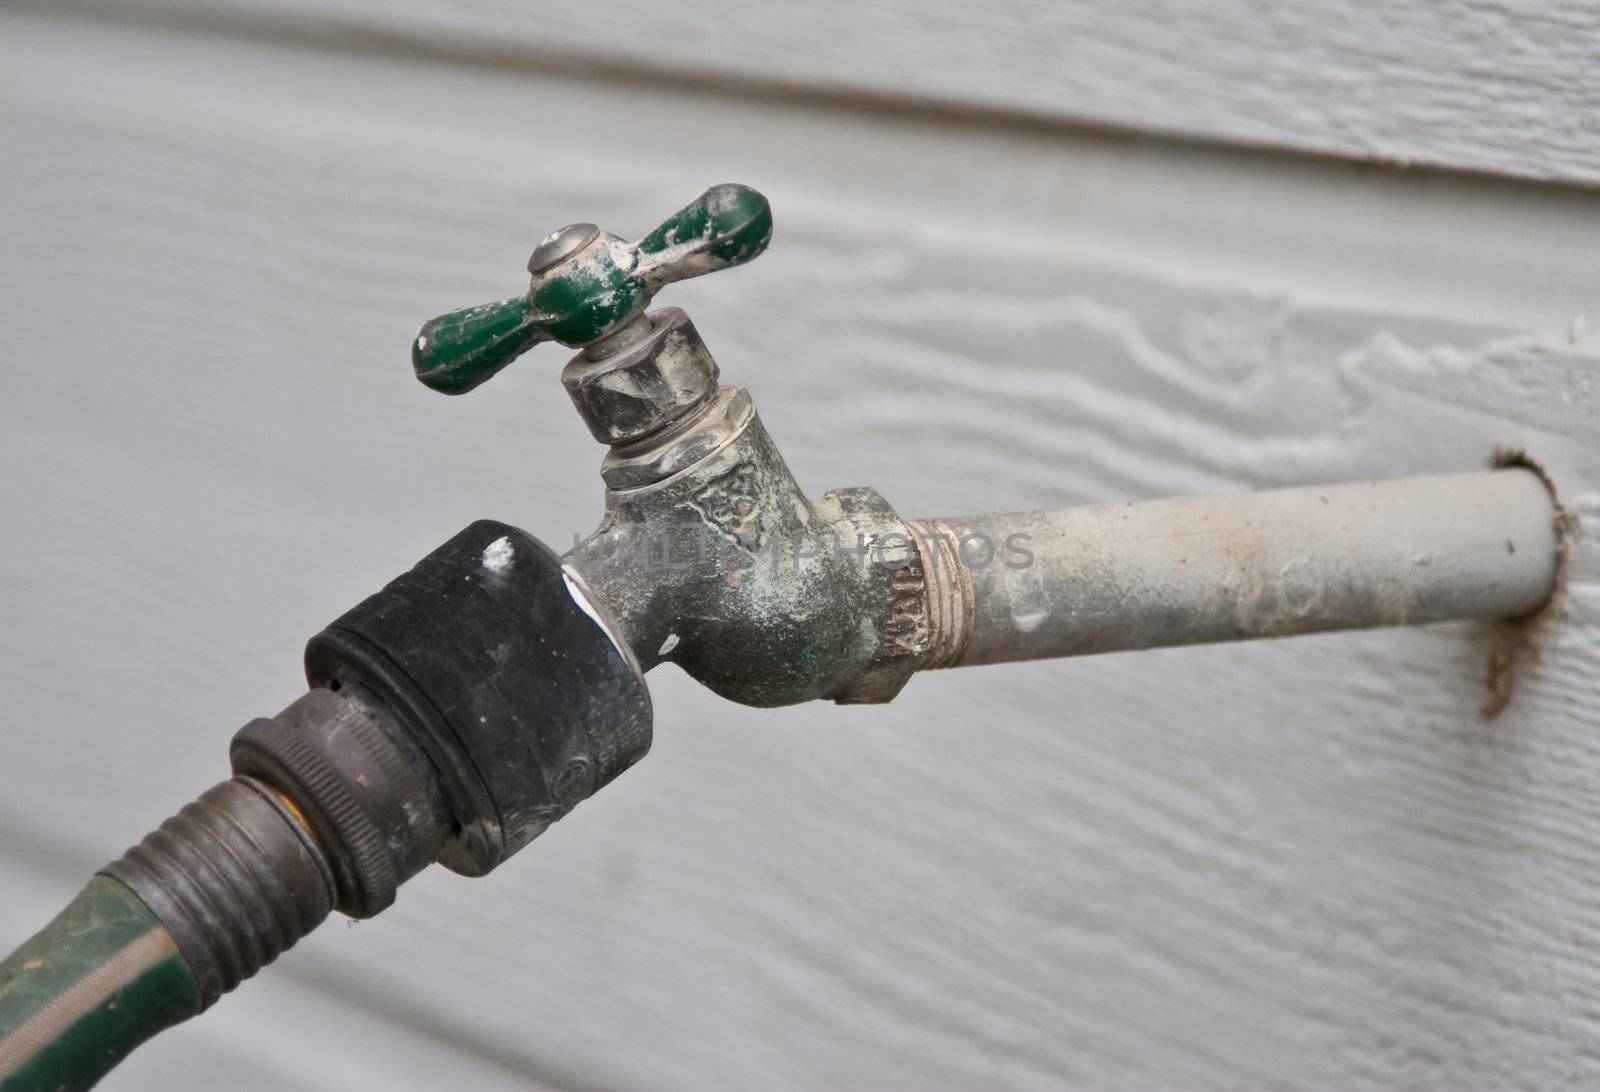 Weathered hose spout with spigot